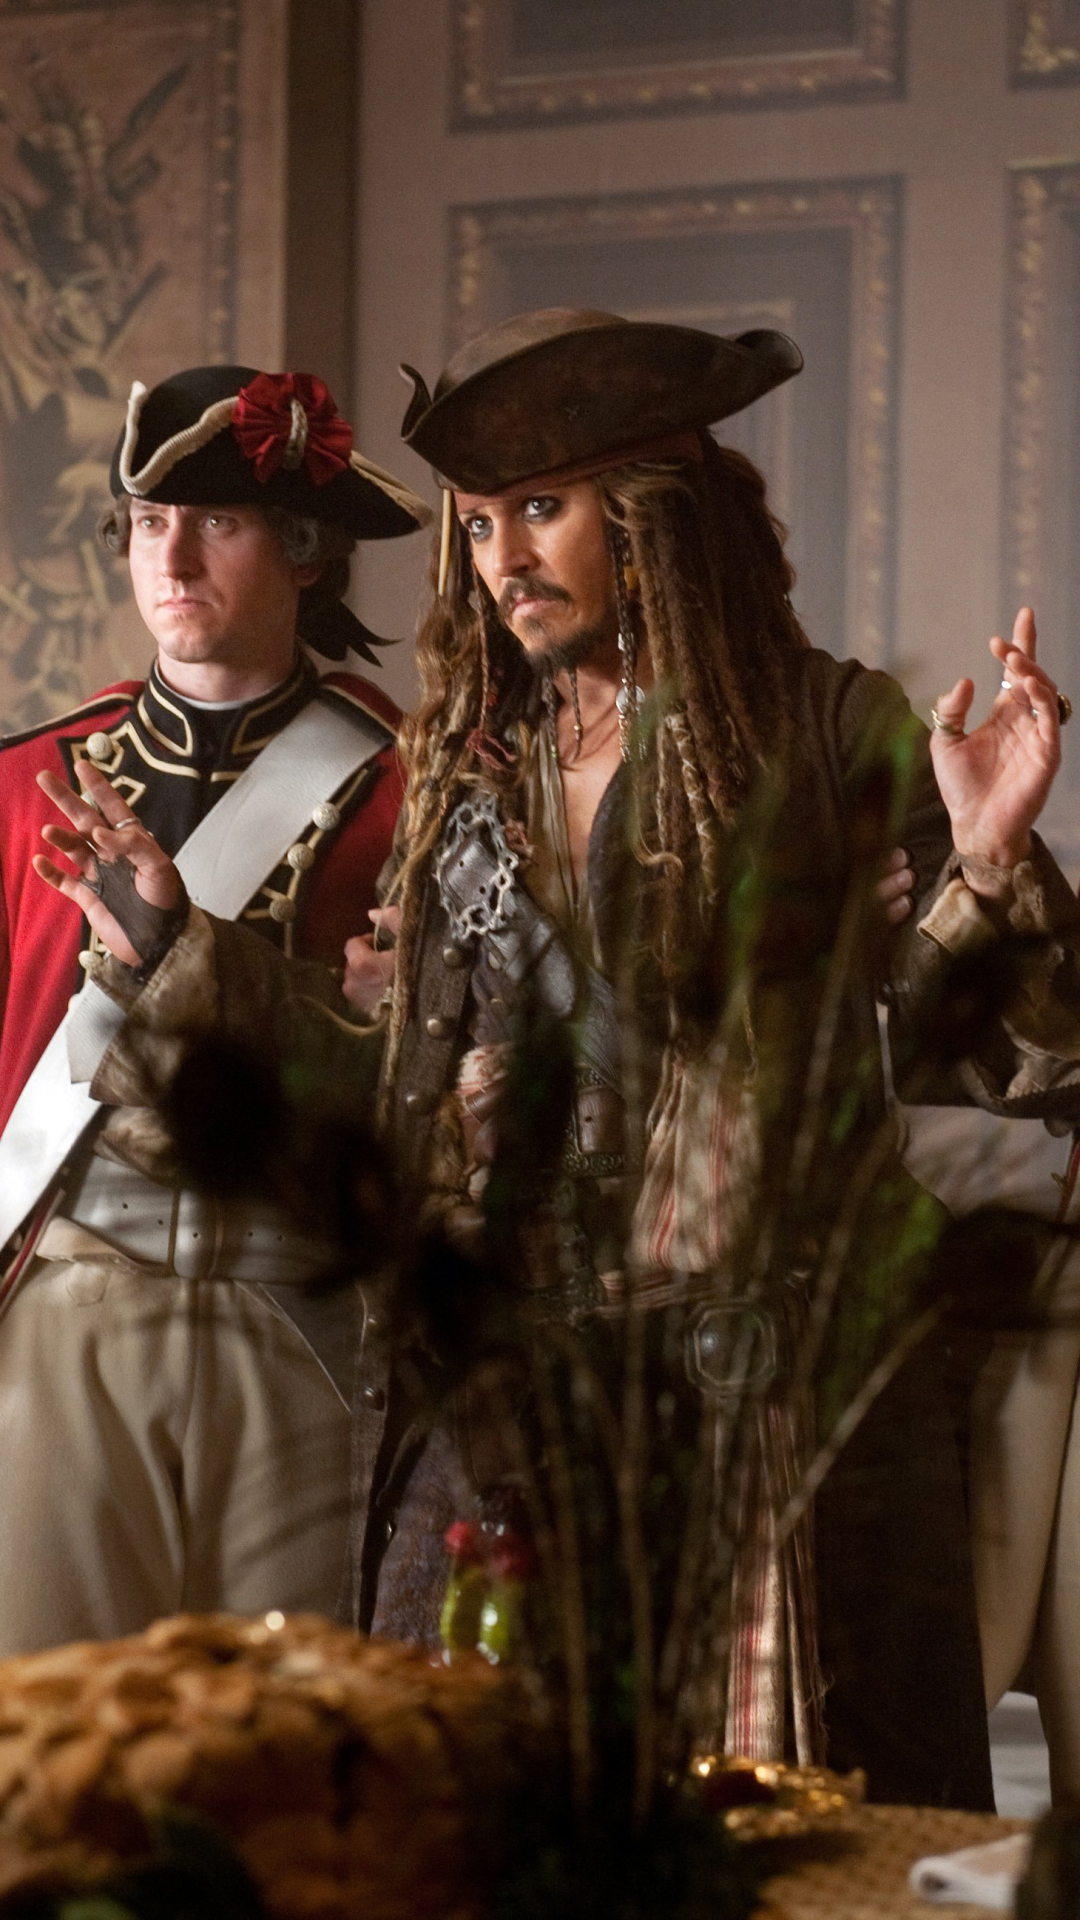 instal the last version for windows Pirates of the Caribbean: On Stranger